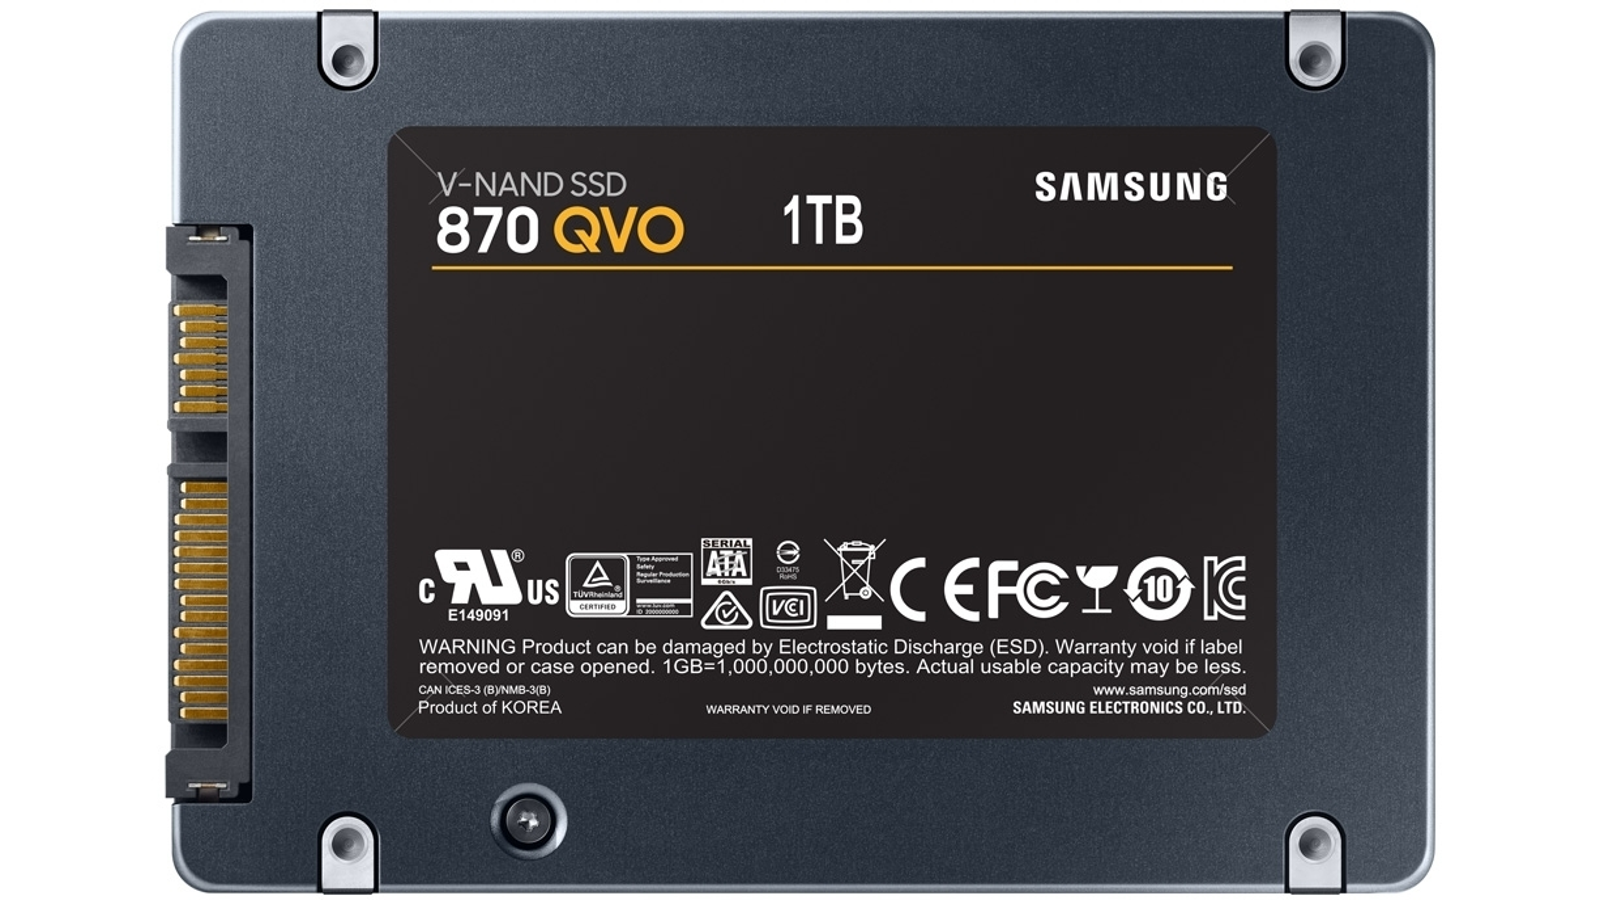 Samsung 870 QVO 1 TB Review - Terrible, Do Not Buy - Write